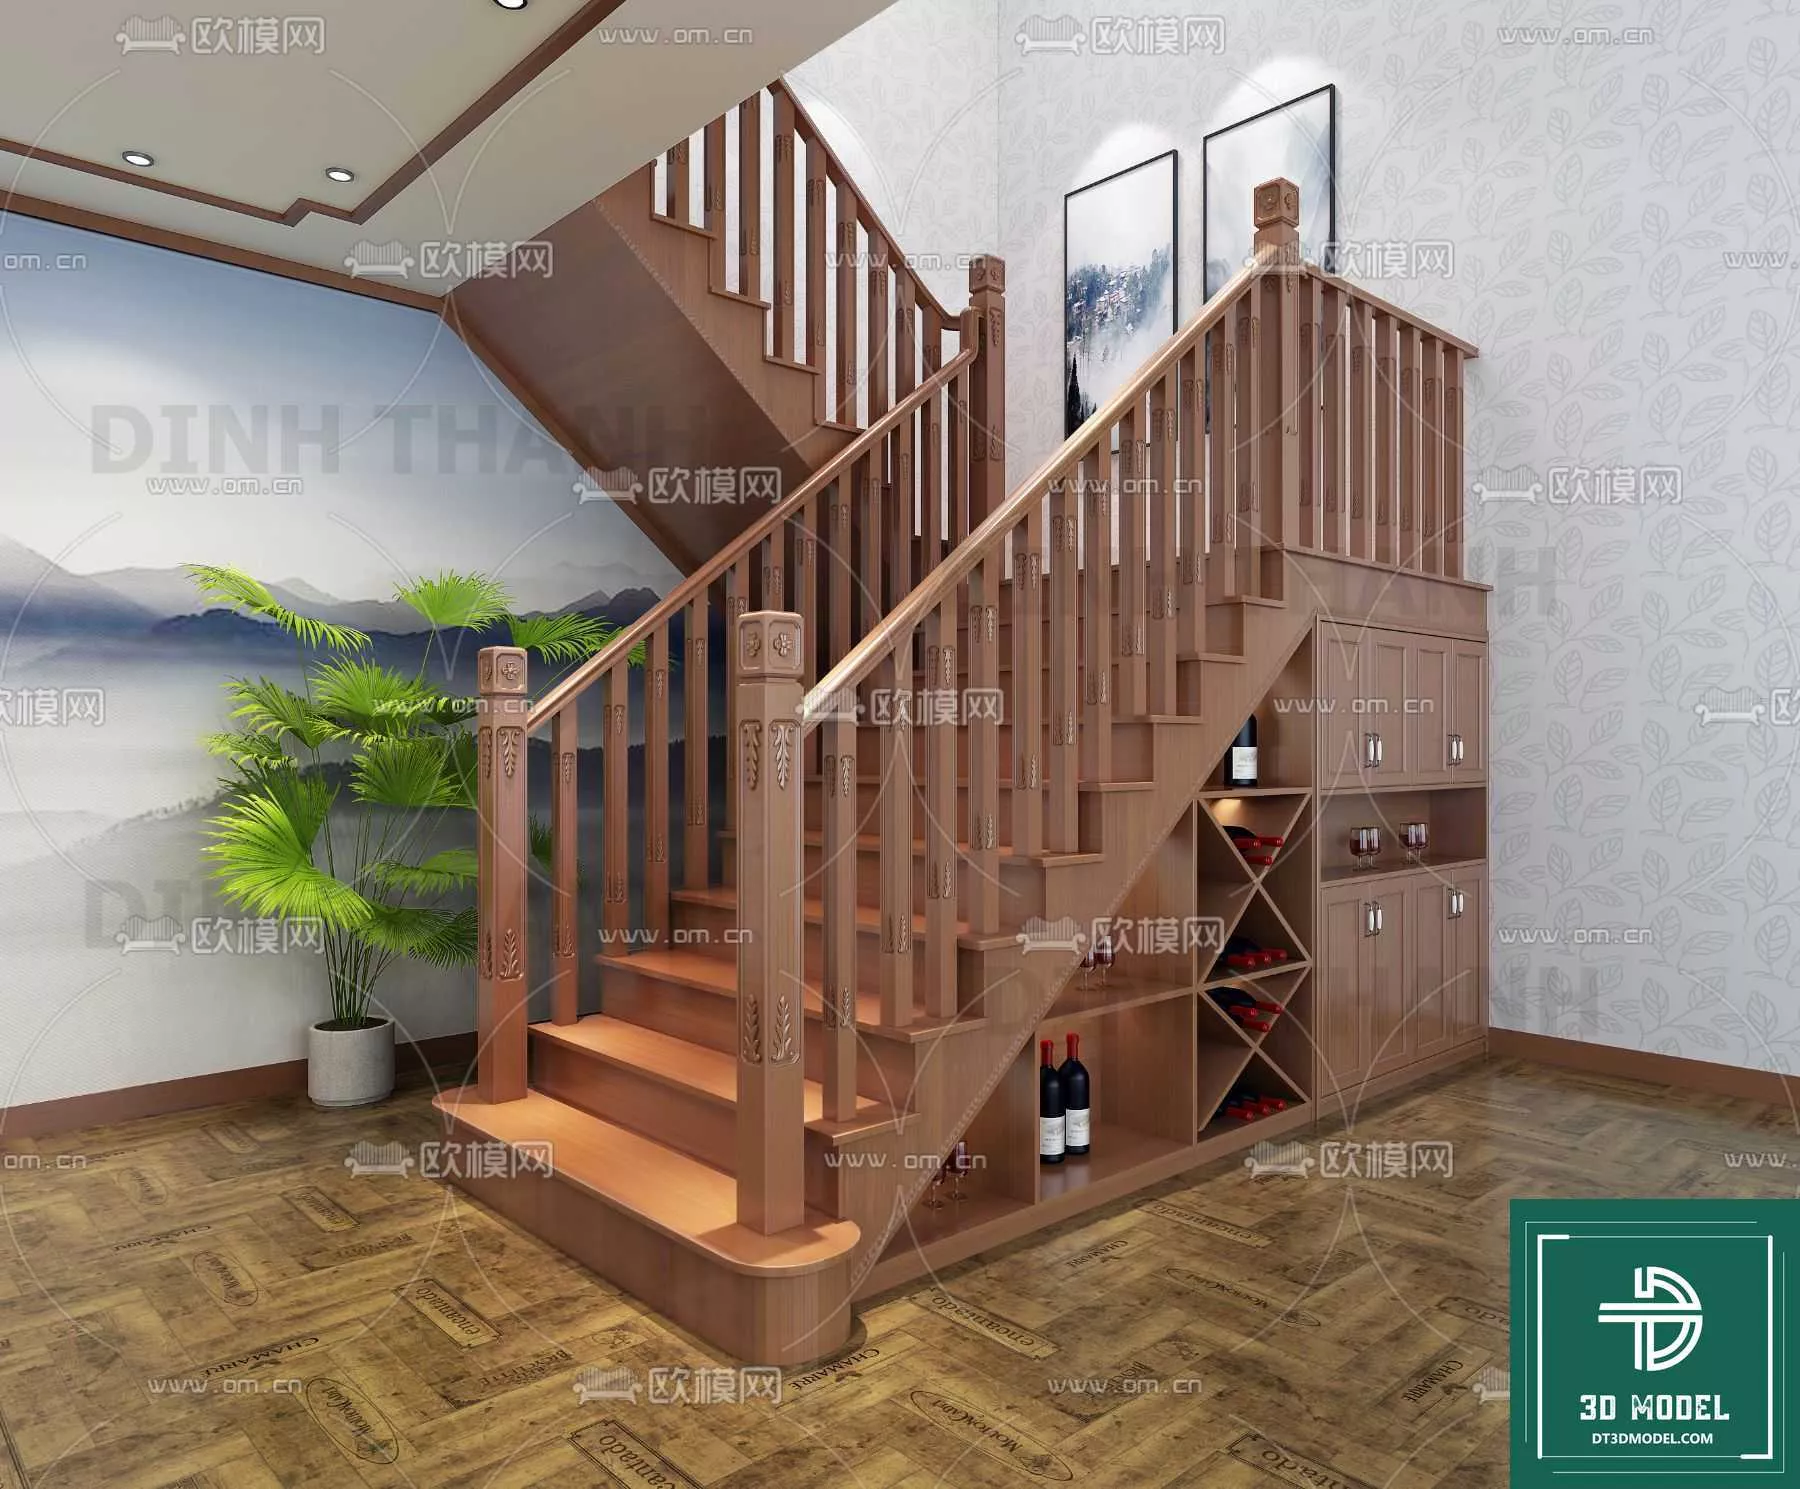 MODERN STAIR - SKETCHUP 3D MODEL - VRAY OR ENSCAPE - ID14151